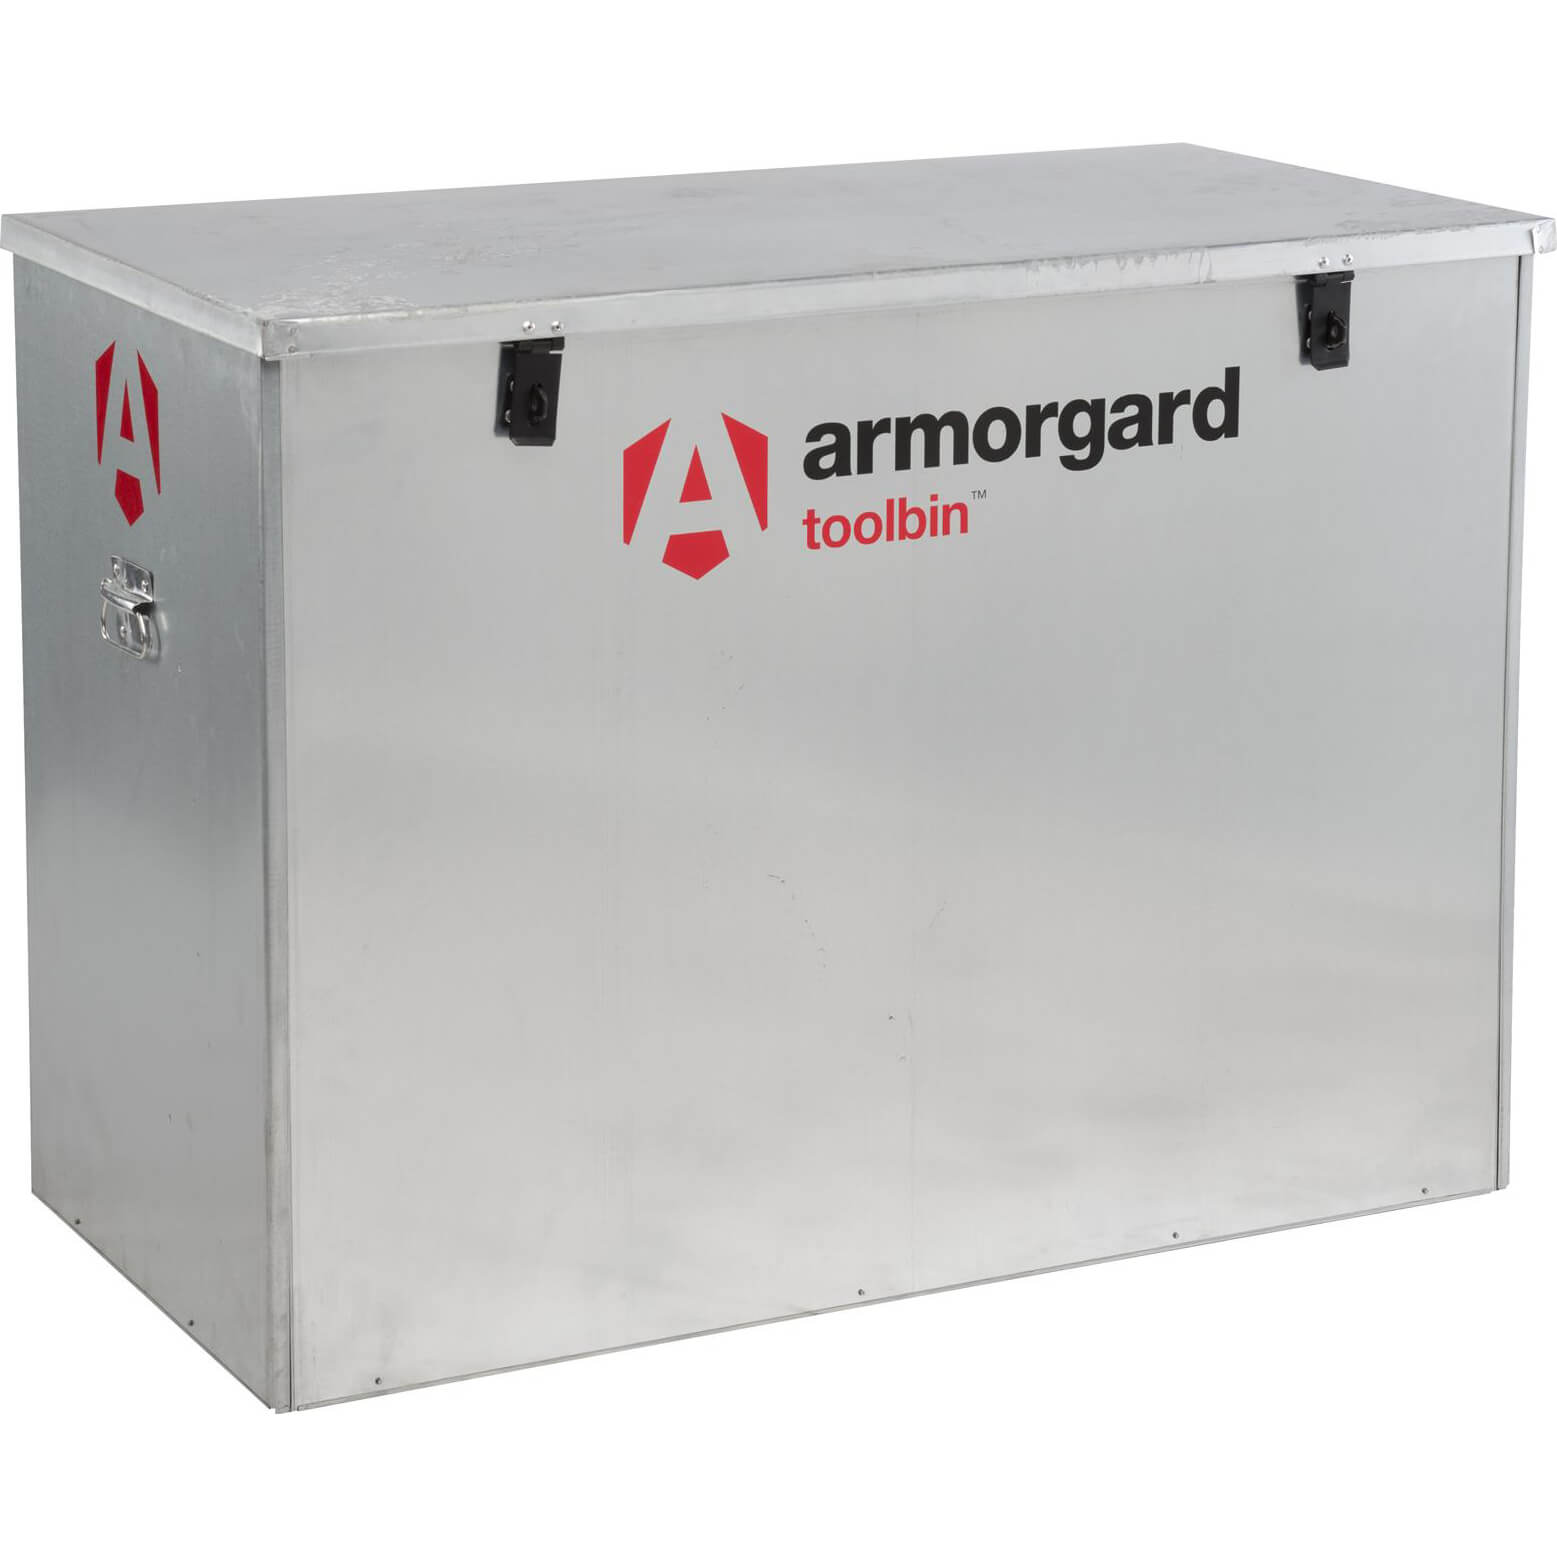 Image of Armorgard Toolbin Galvanised Secure Tool Storage Chest 1190mm 585mm 850mm